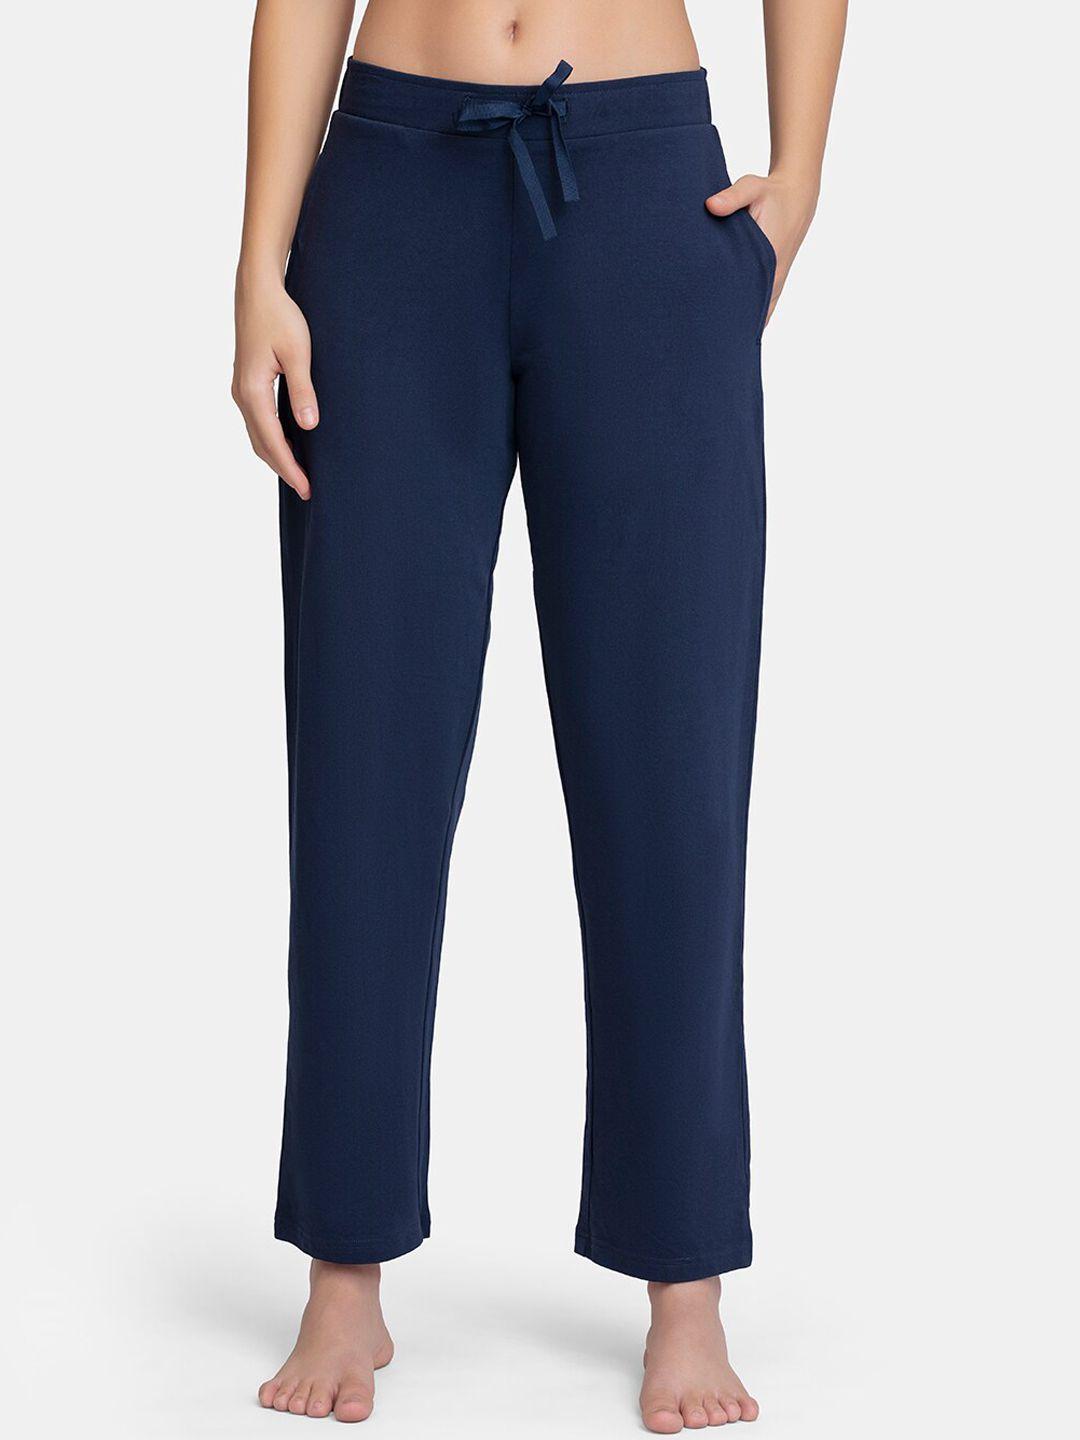 amante women navy blue solid lounge pant